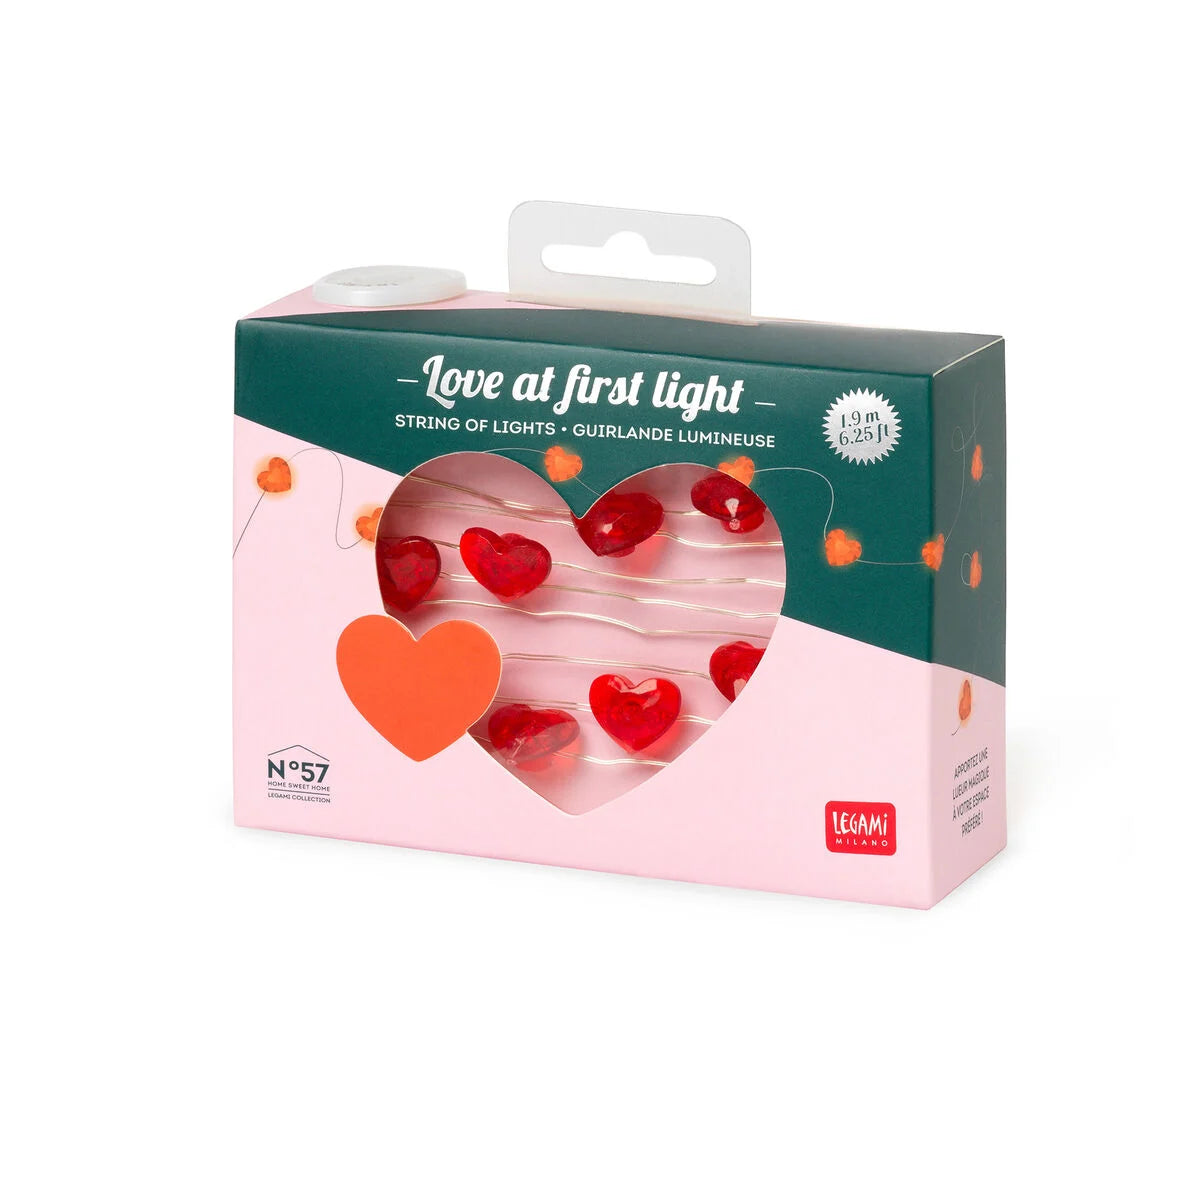 Clever Gadgets Legami Led String Lights Heart by Weirs of Baggot Street